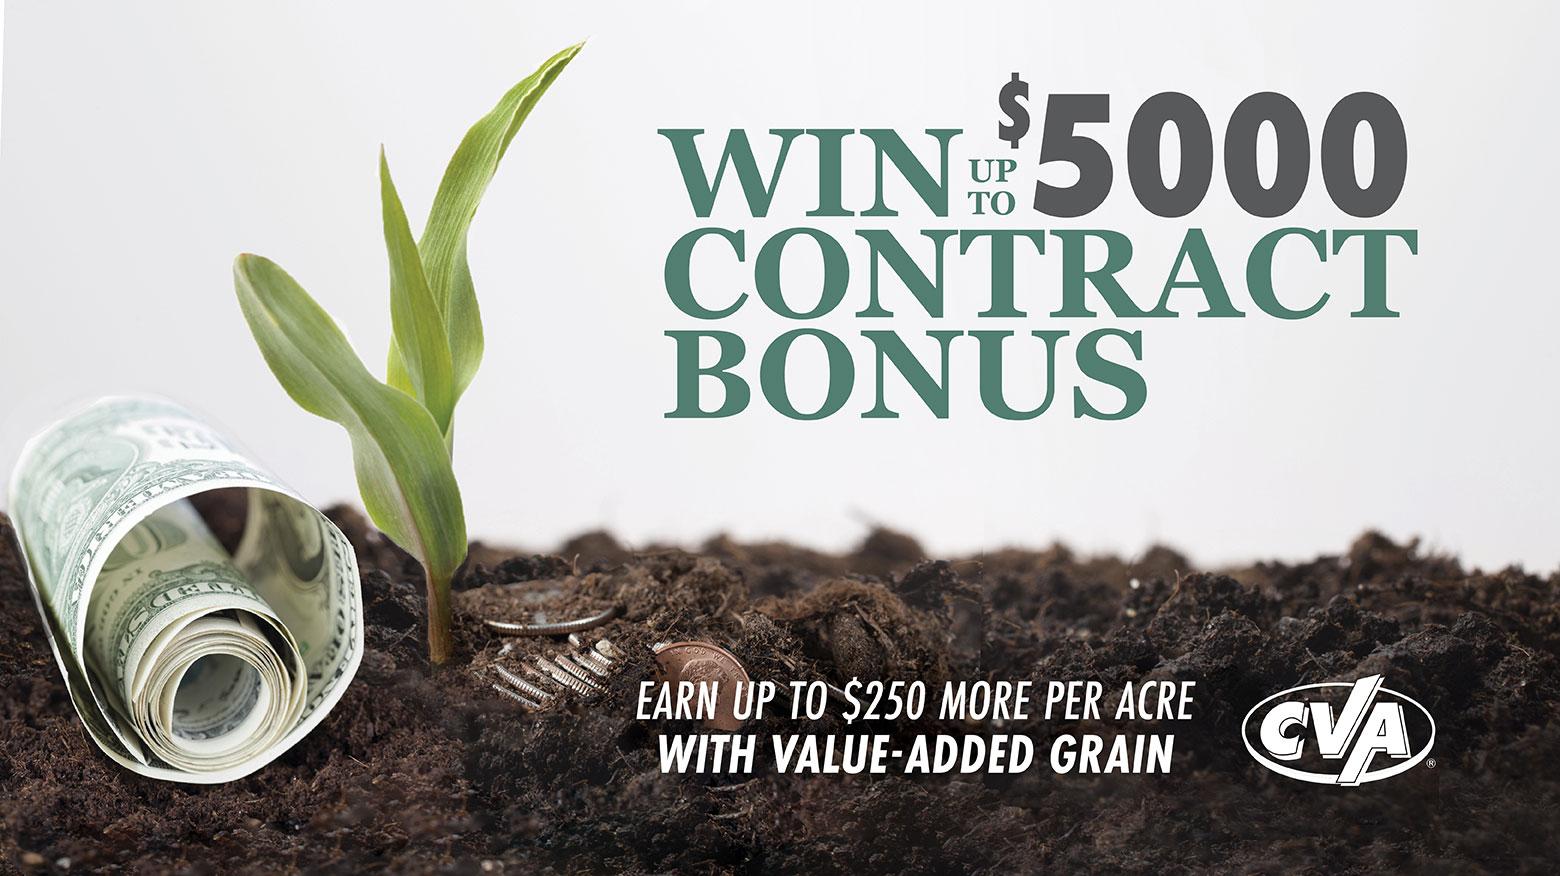 Value Added - Earn up to $250 more per acre